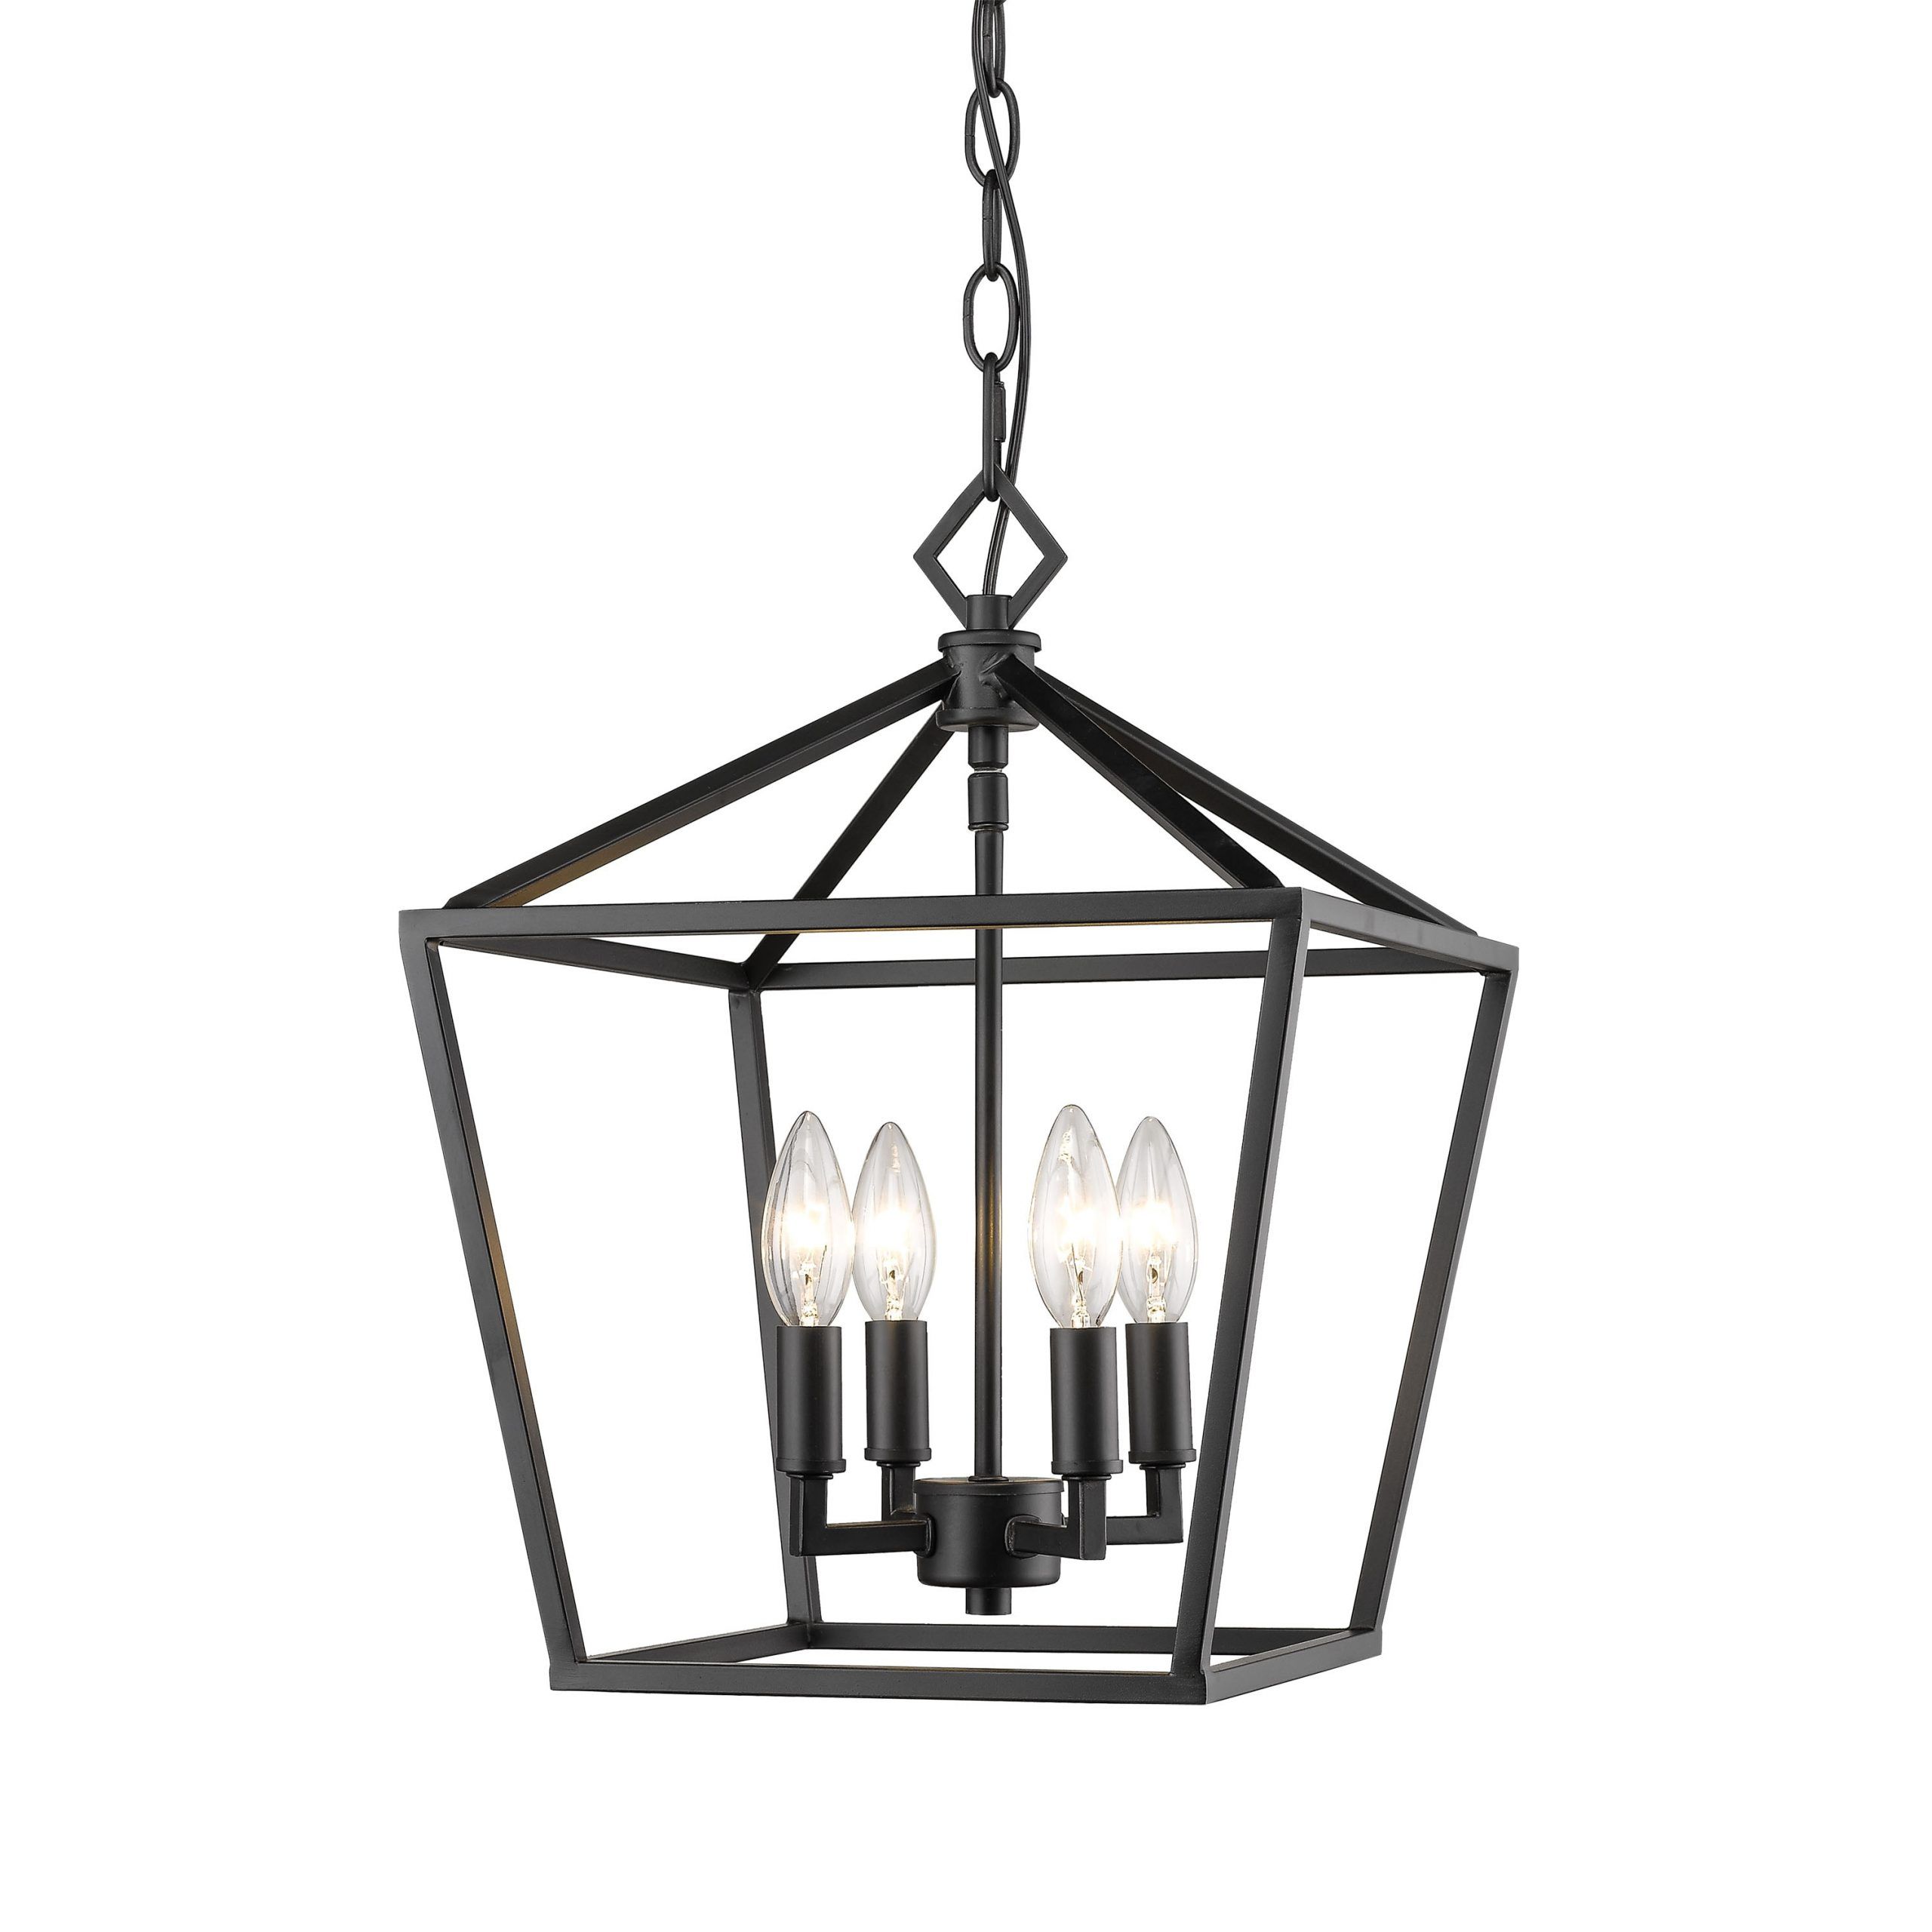 Millennium Lighting 4 Light Matte Black Traditional Lantern Outdoor Pendant  Light In The Pendant Lighting Department At Lowes With Matte Black Lantern Chandeliers (View 6 of 15)